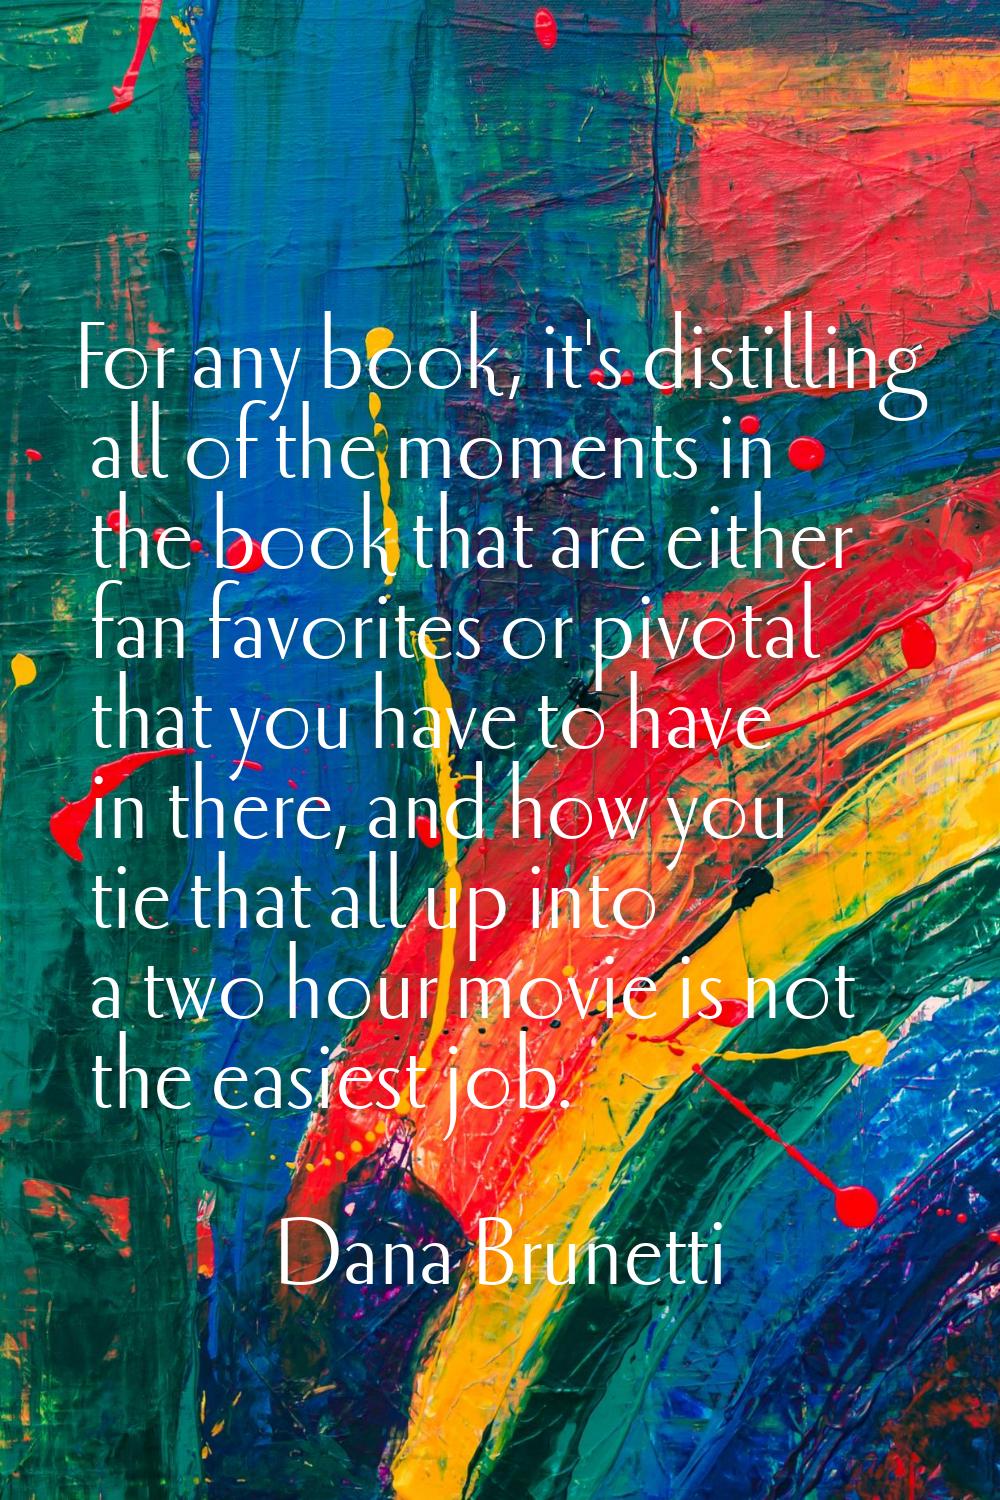 For any book, it's distilling all of the moments in the book that are either fan favorites or pivot